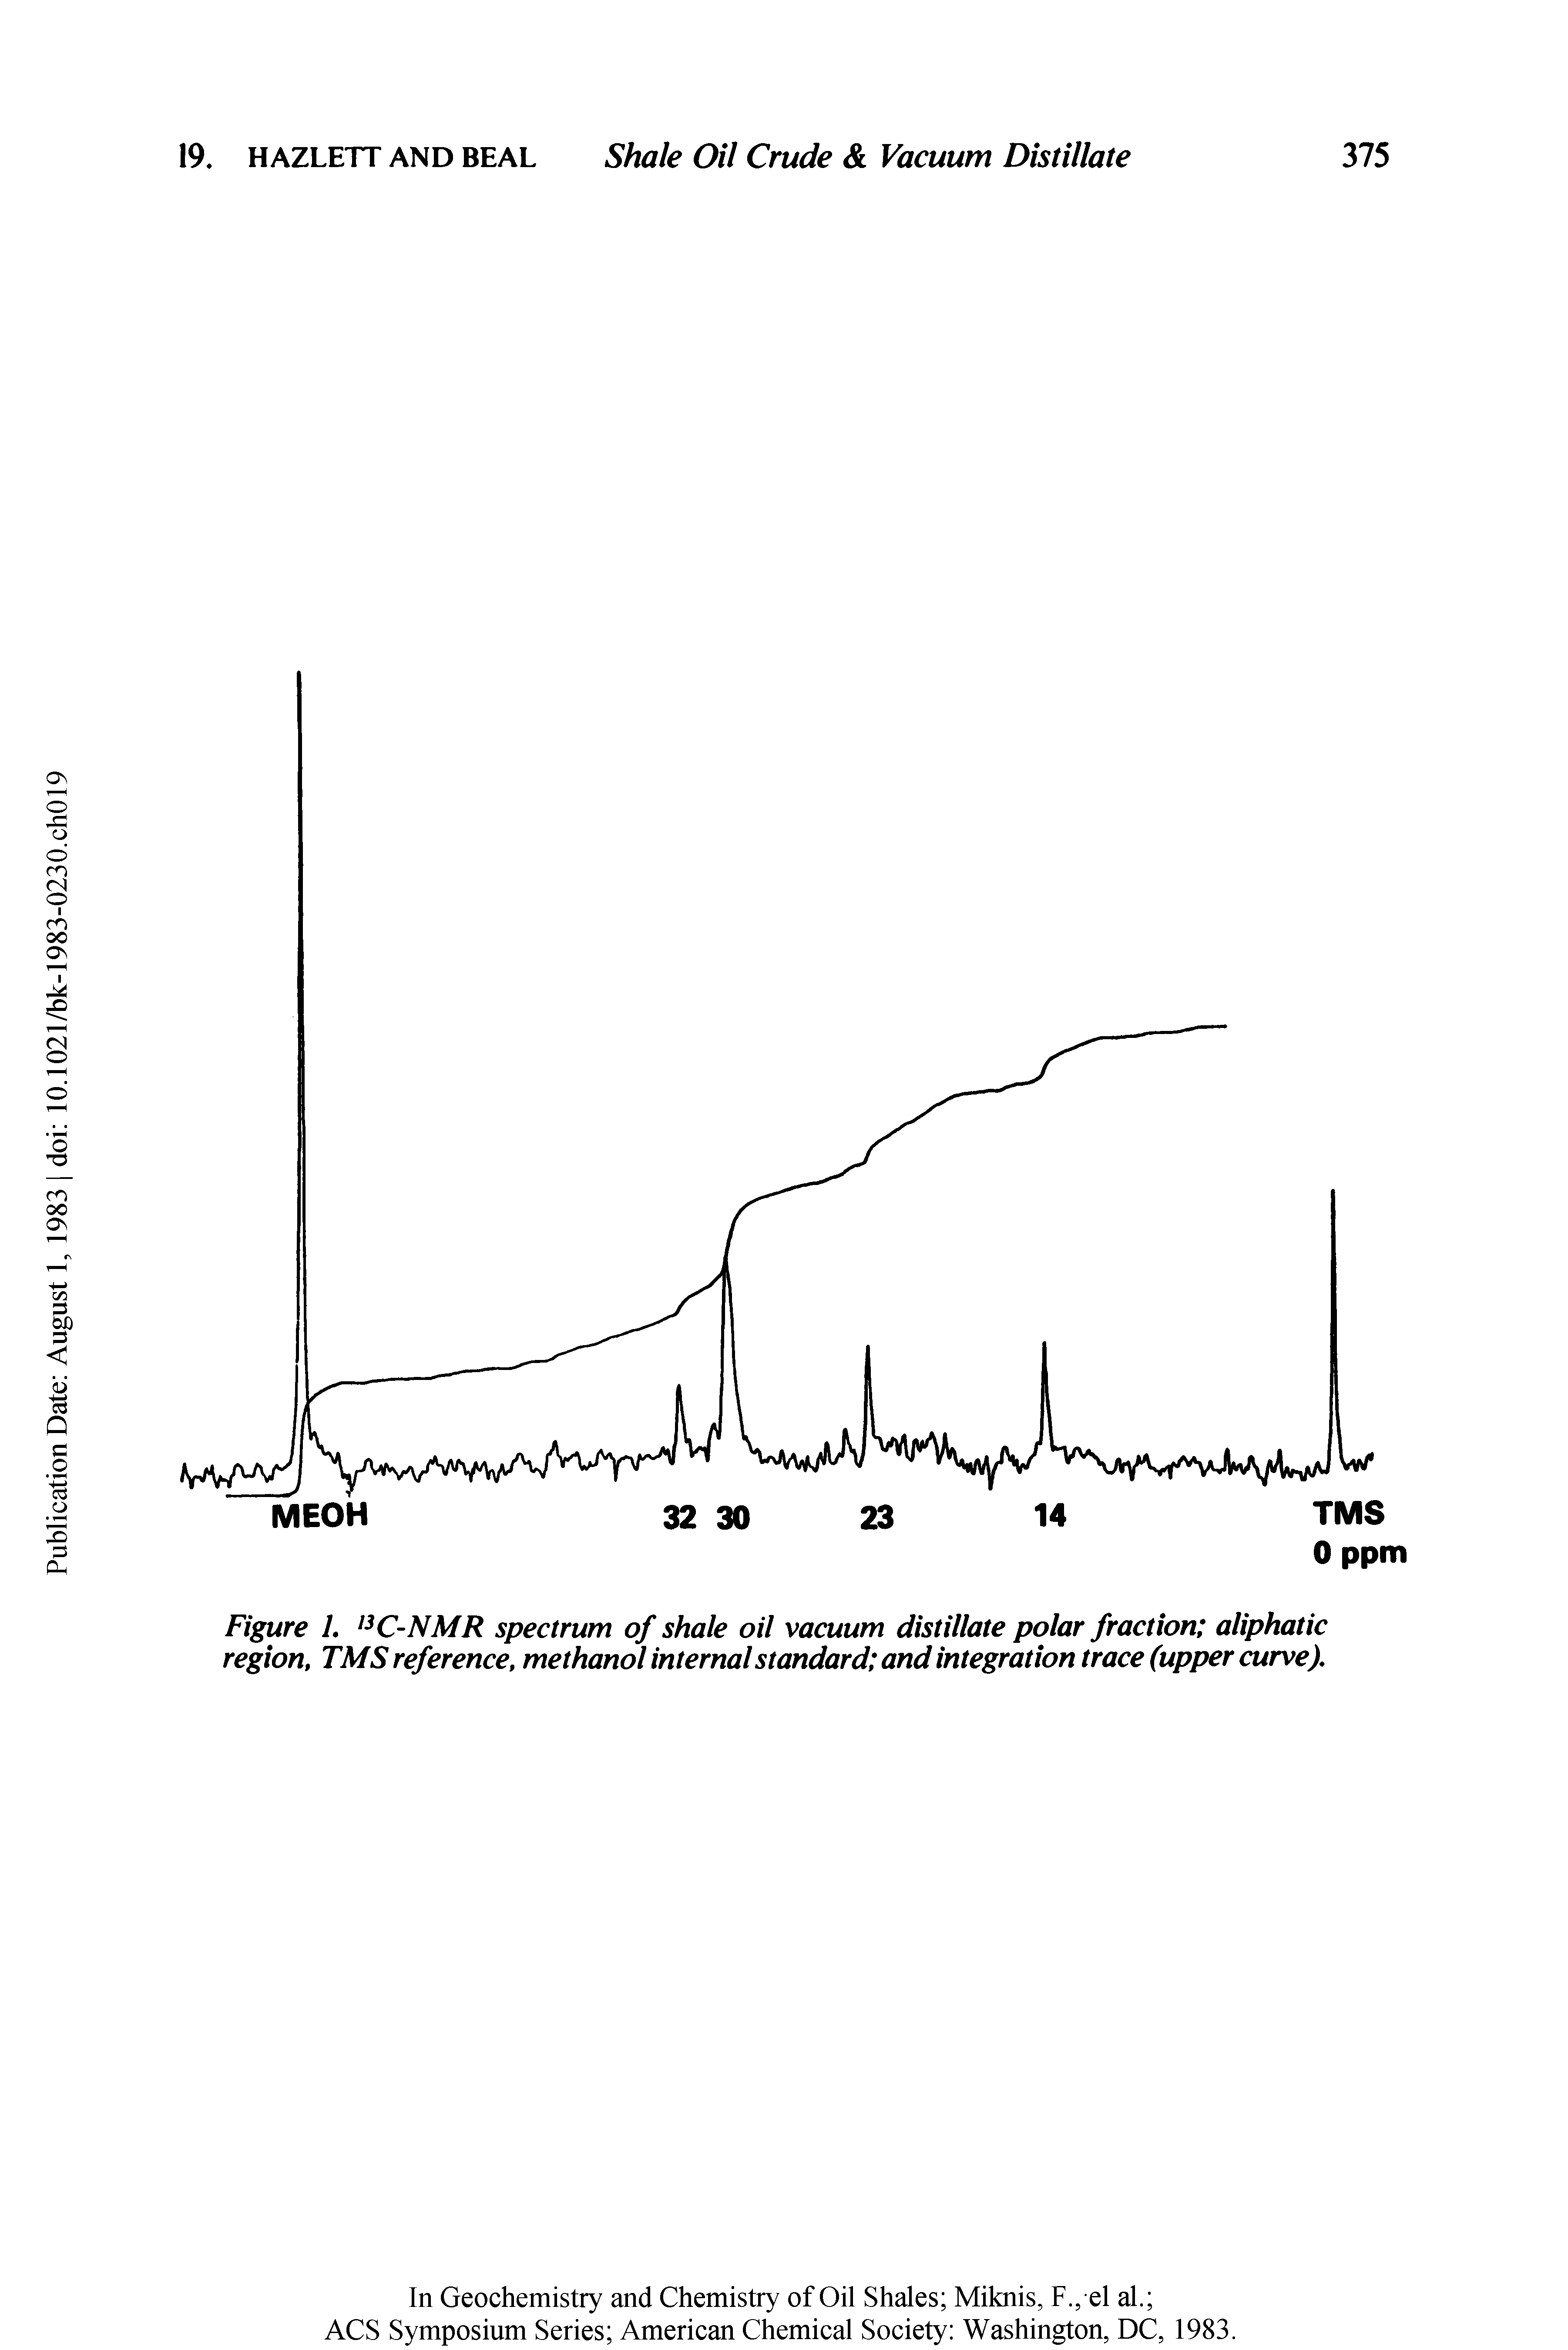 Figure L I3C-NMR spectrum of shale oil vacuum distillate polar fraction aliphatic region, TMS reference, methanol internal standard and integration trace (upper curve).